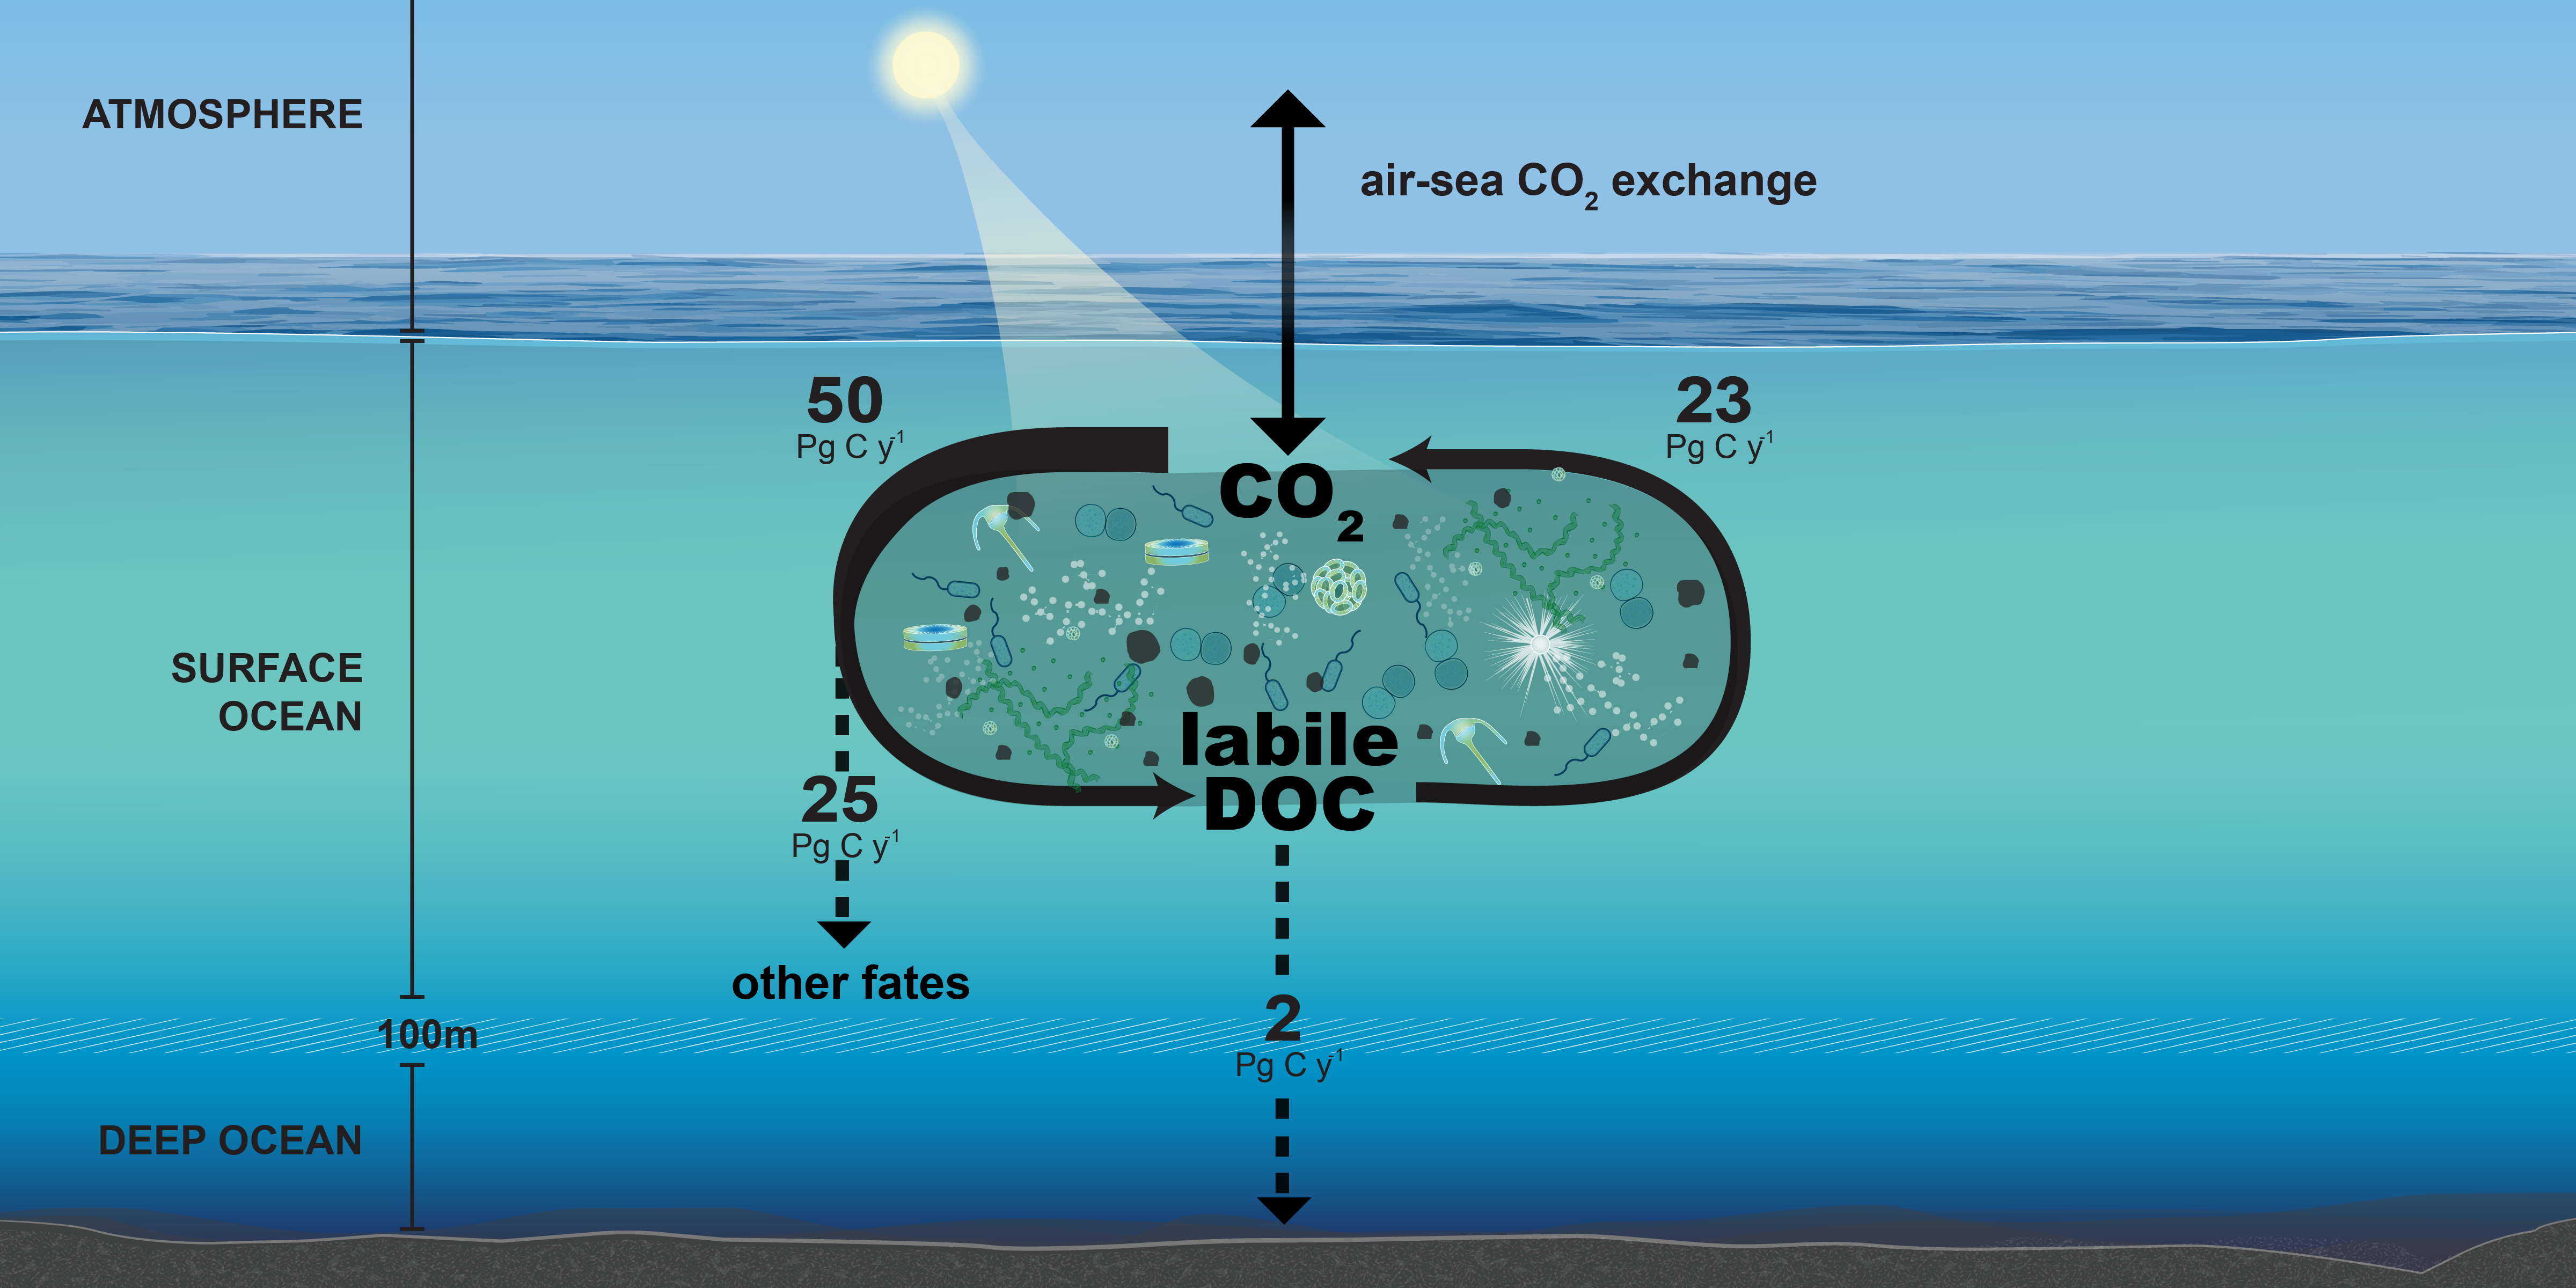 The ocean carbon cycle  shows the flux of carbon through the surface and deep ocean. One-quarter of carbon derived from photosynthesis on Earth cycles rapidly through a pool of labile seawater metabolites within the dissolved organic carbon pool, generated by the activities of microbes. Figure created by WHOI Creative Studio.